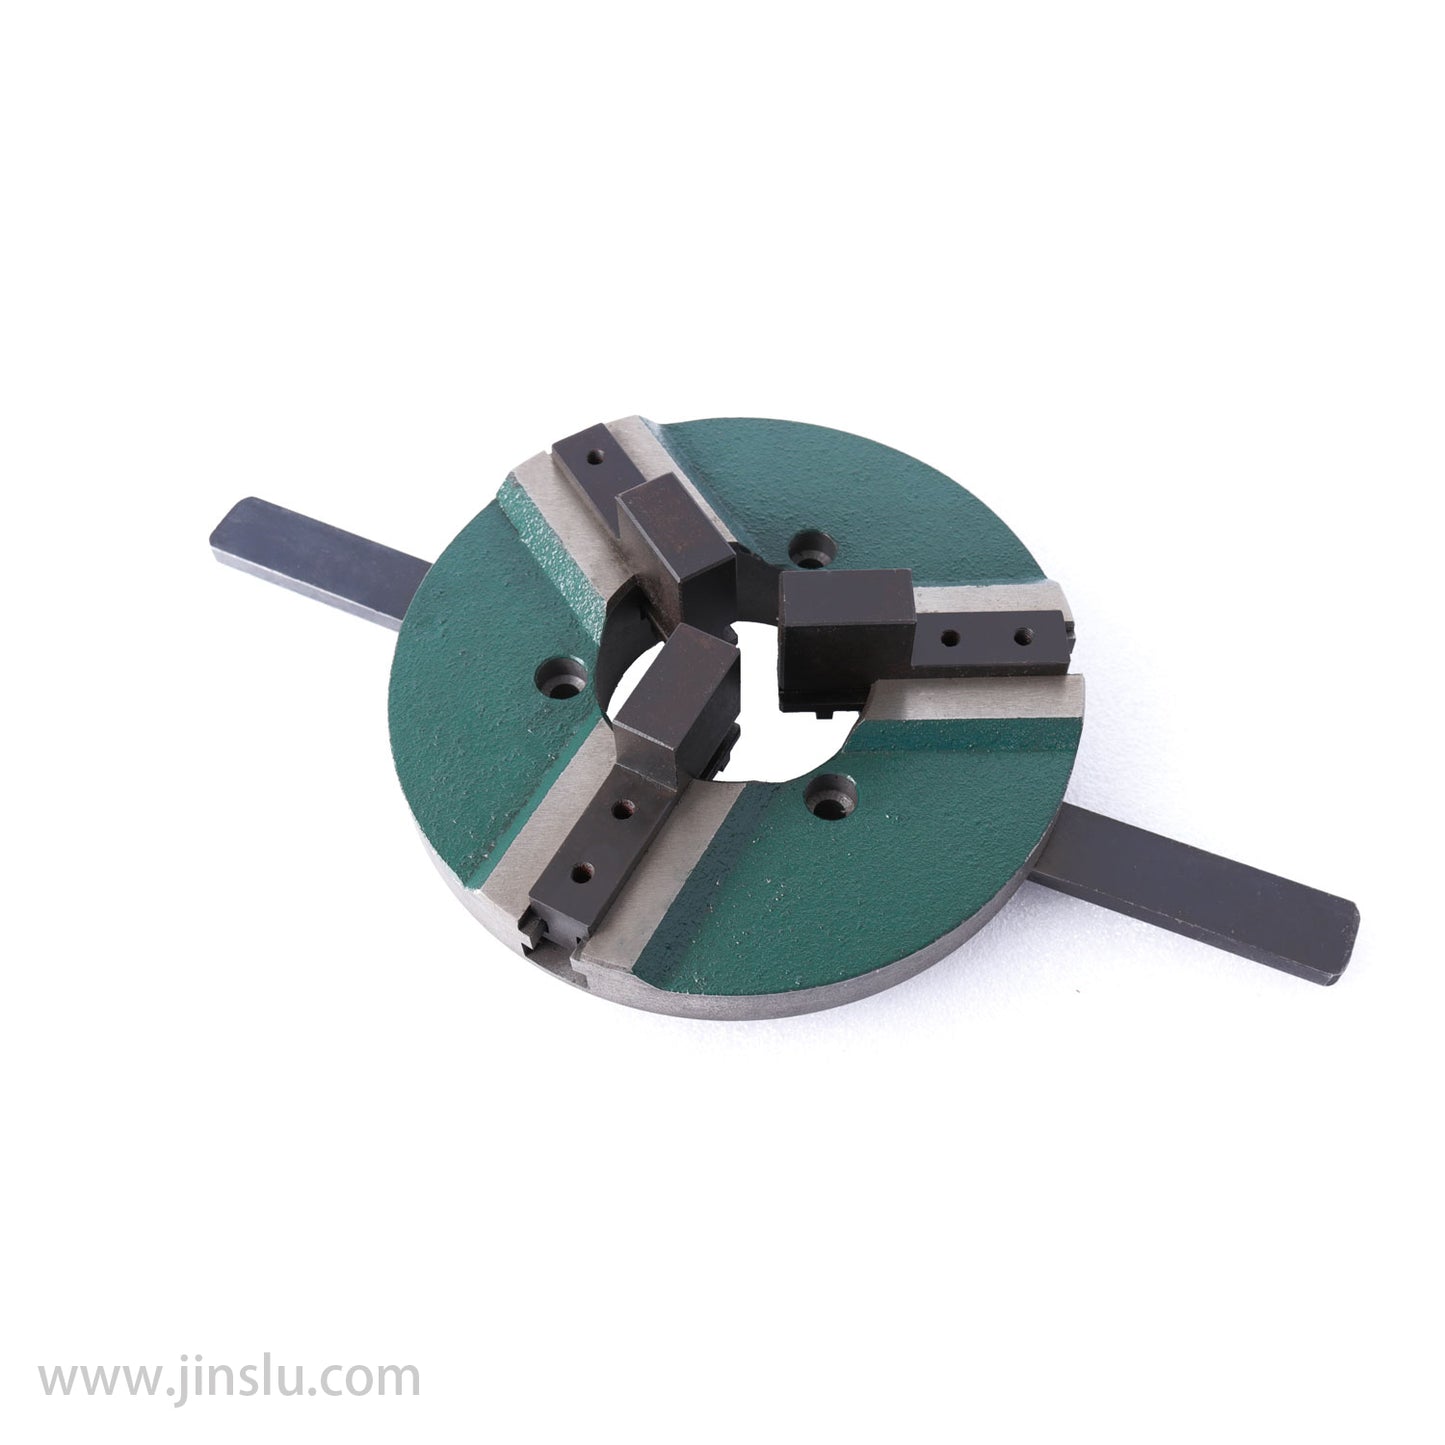 WP-200 Welding Clamping Chuck Suitable for Welding Pipe workpiece Chuck.